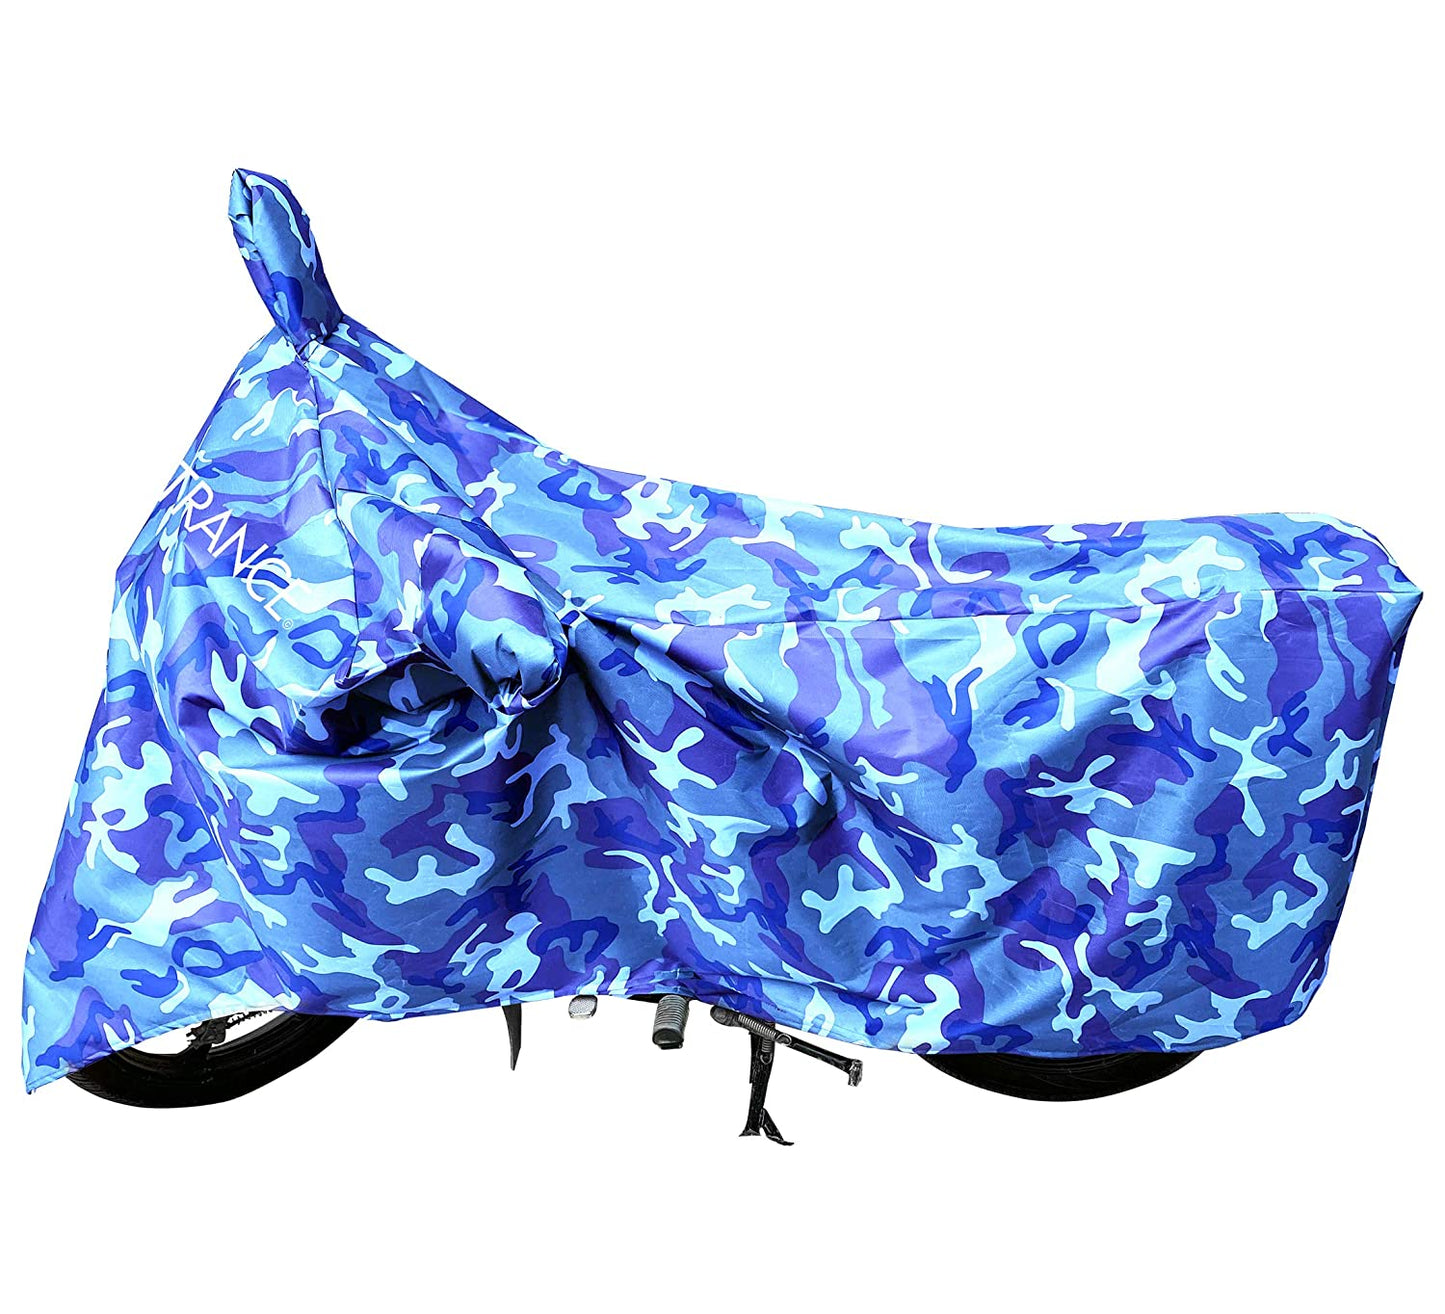 MotoTrance Jungle Bike Body Covers For Hero Electric Optima Plus - Interlock-Stitched Waterproof and Heat Resistant with Mirror Pockets